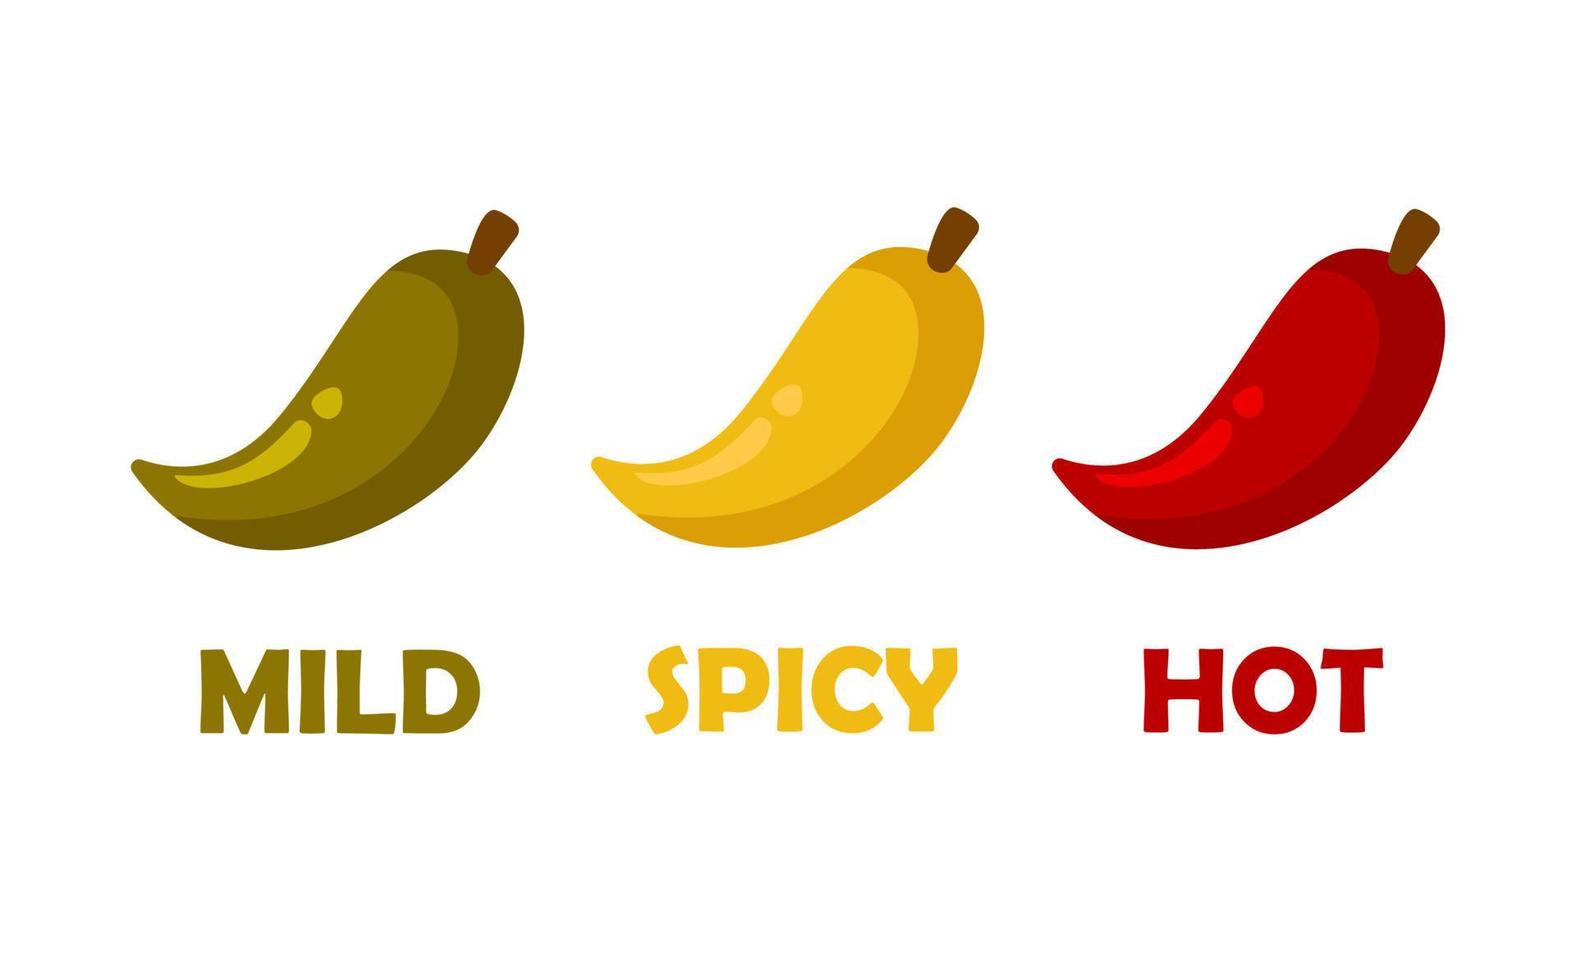 Hot spicy level labels of vector